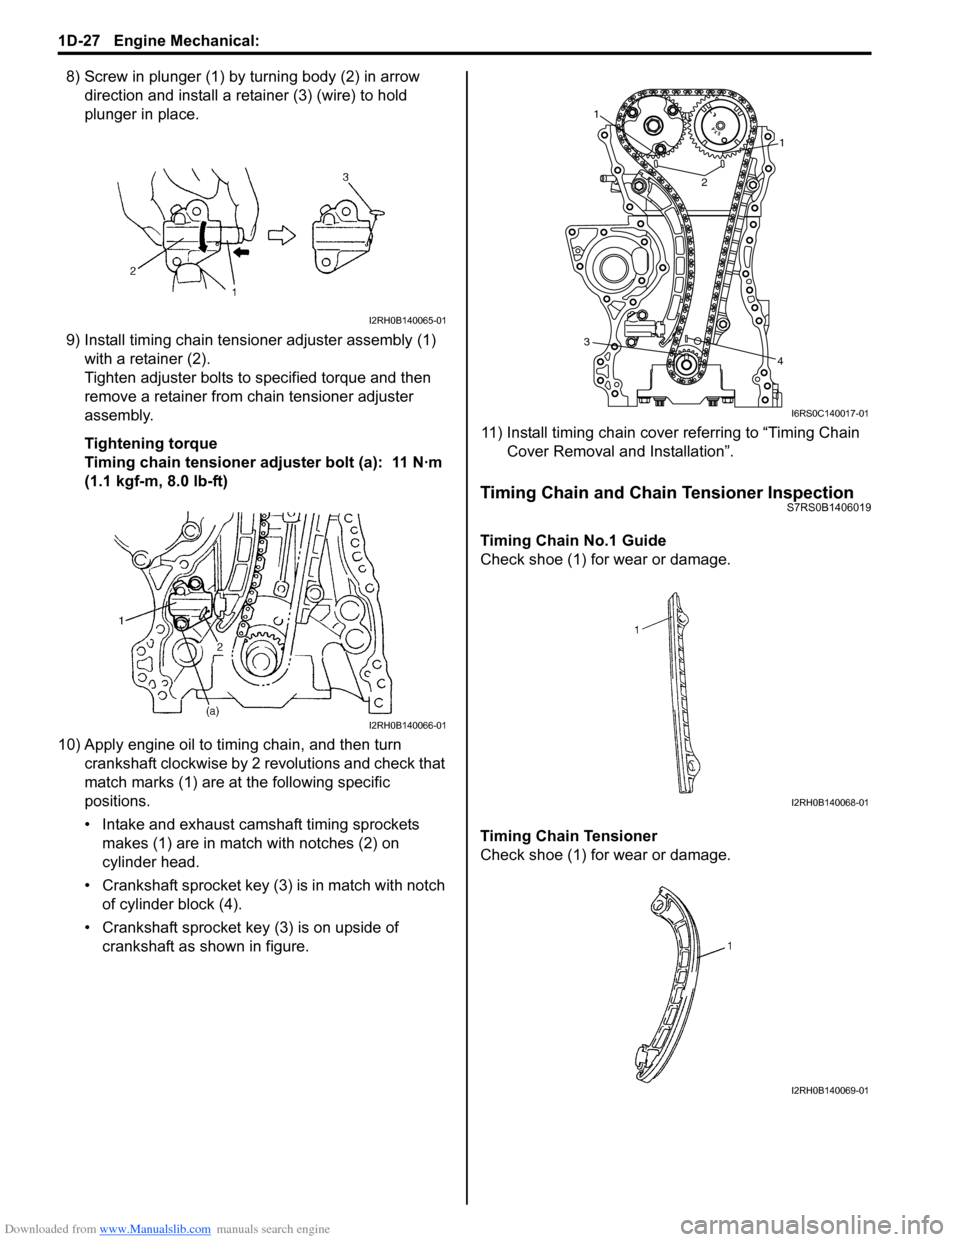 SUZUKI SWIFT 2007 2.G Service Service Manual Downloaded from www.Manualslib.com manuals search engine 1D-27 Engine Mechanical: 
8) Screw in plunger (1) by turning body (2) in arrow direction and install a reta iner (3) (wire) to hold 
plunger in